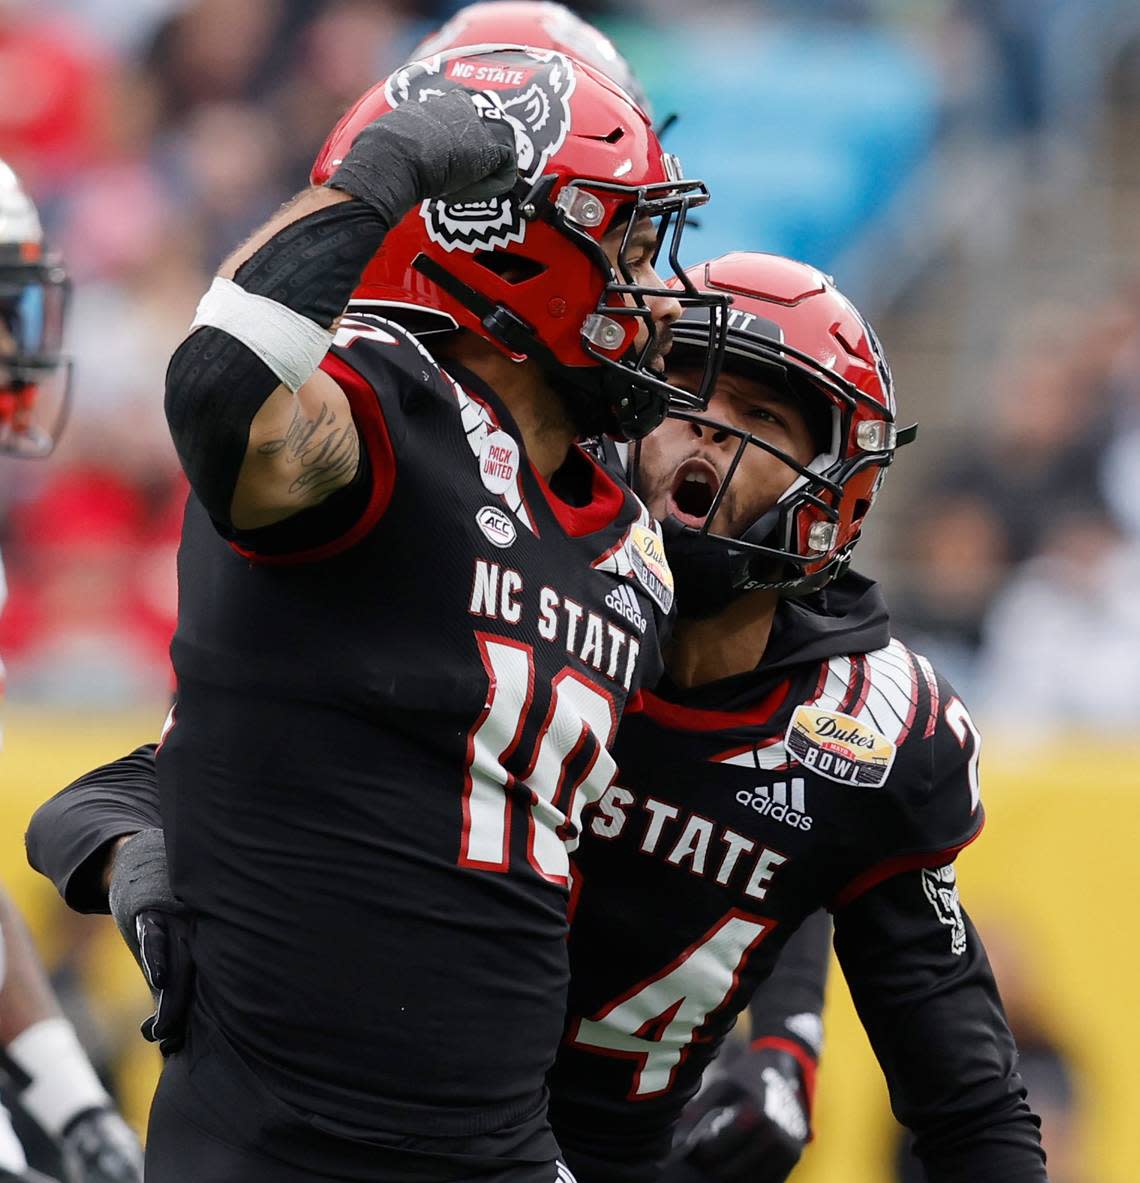 N.C. State’s Derrek Pitts Jr. (24) celebrates with Tanner Ingle (10) after Ingle tackled Maryland running back Roman Hemby (24) during the second half of Maryland’s 16-12 victory over N.C. State in the Duke’s Mayo Bowl at Bank of America Stadium in Charlotte, N.C., Friday, Dec. 30, 2022.